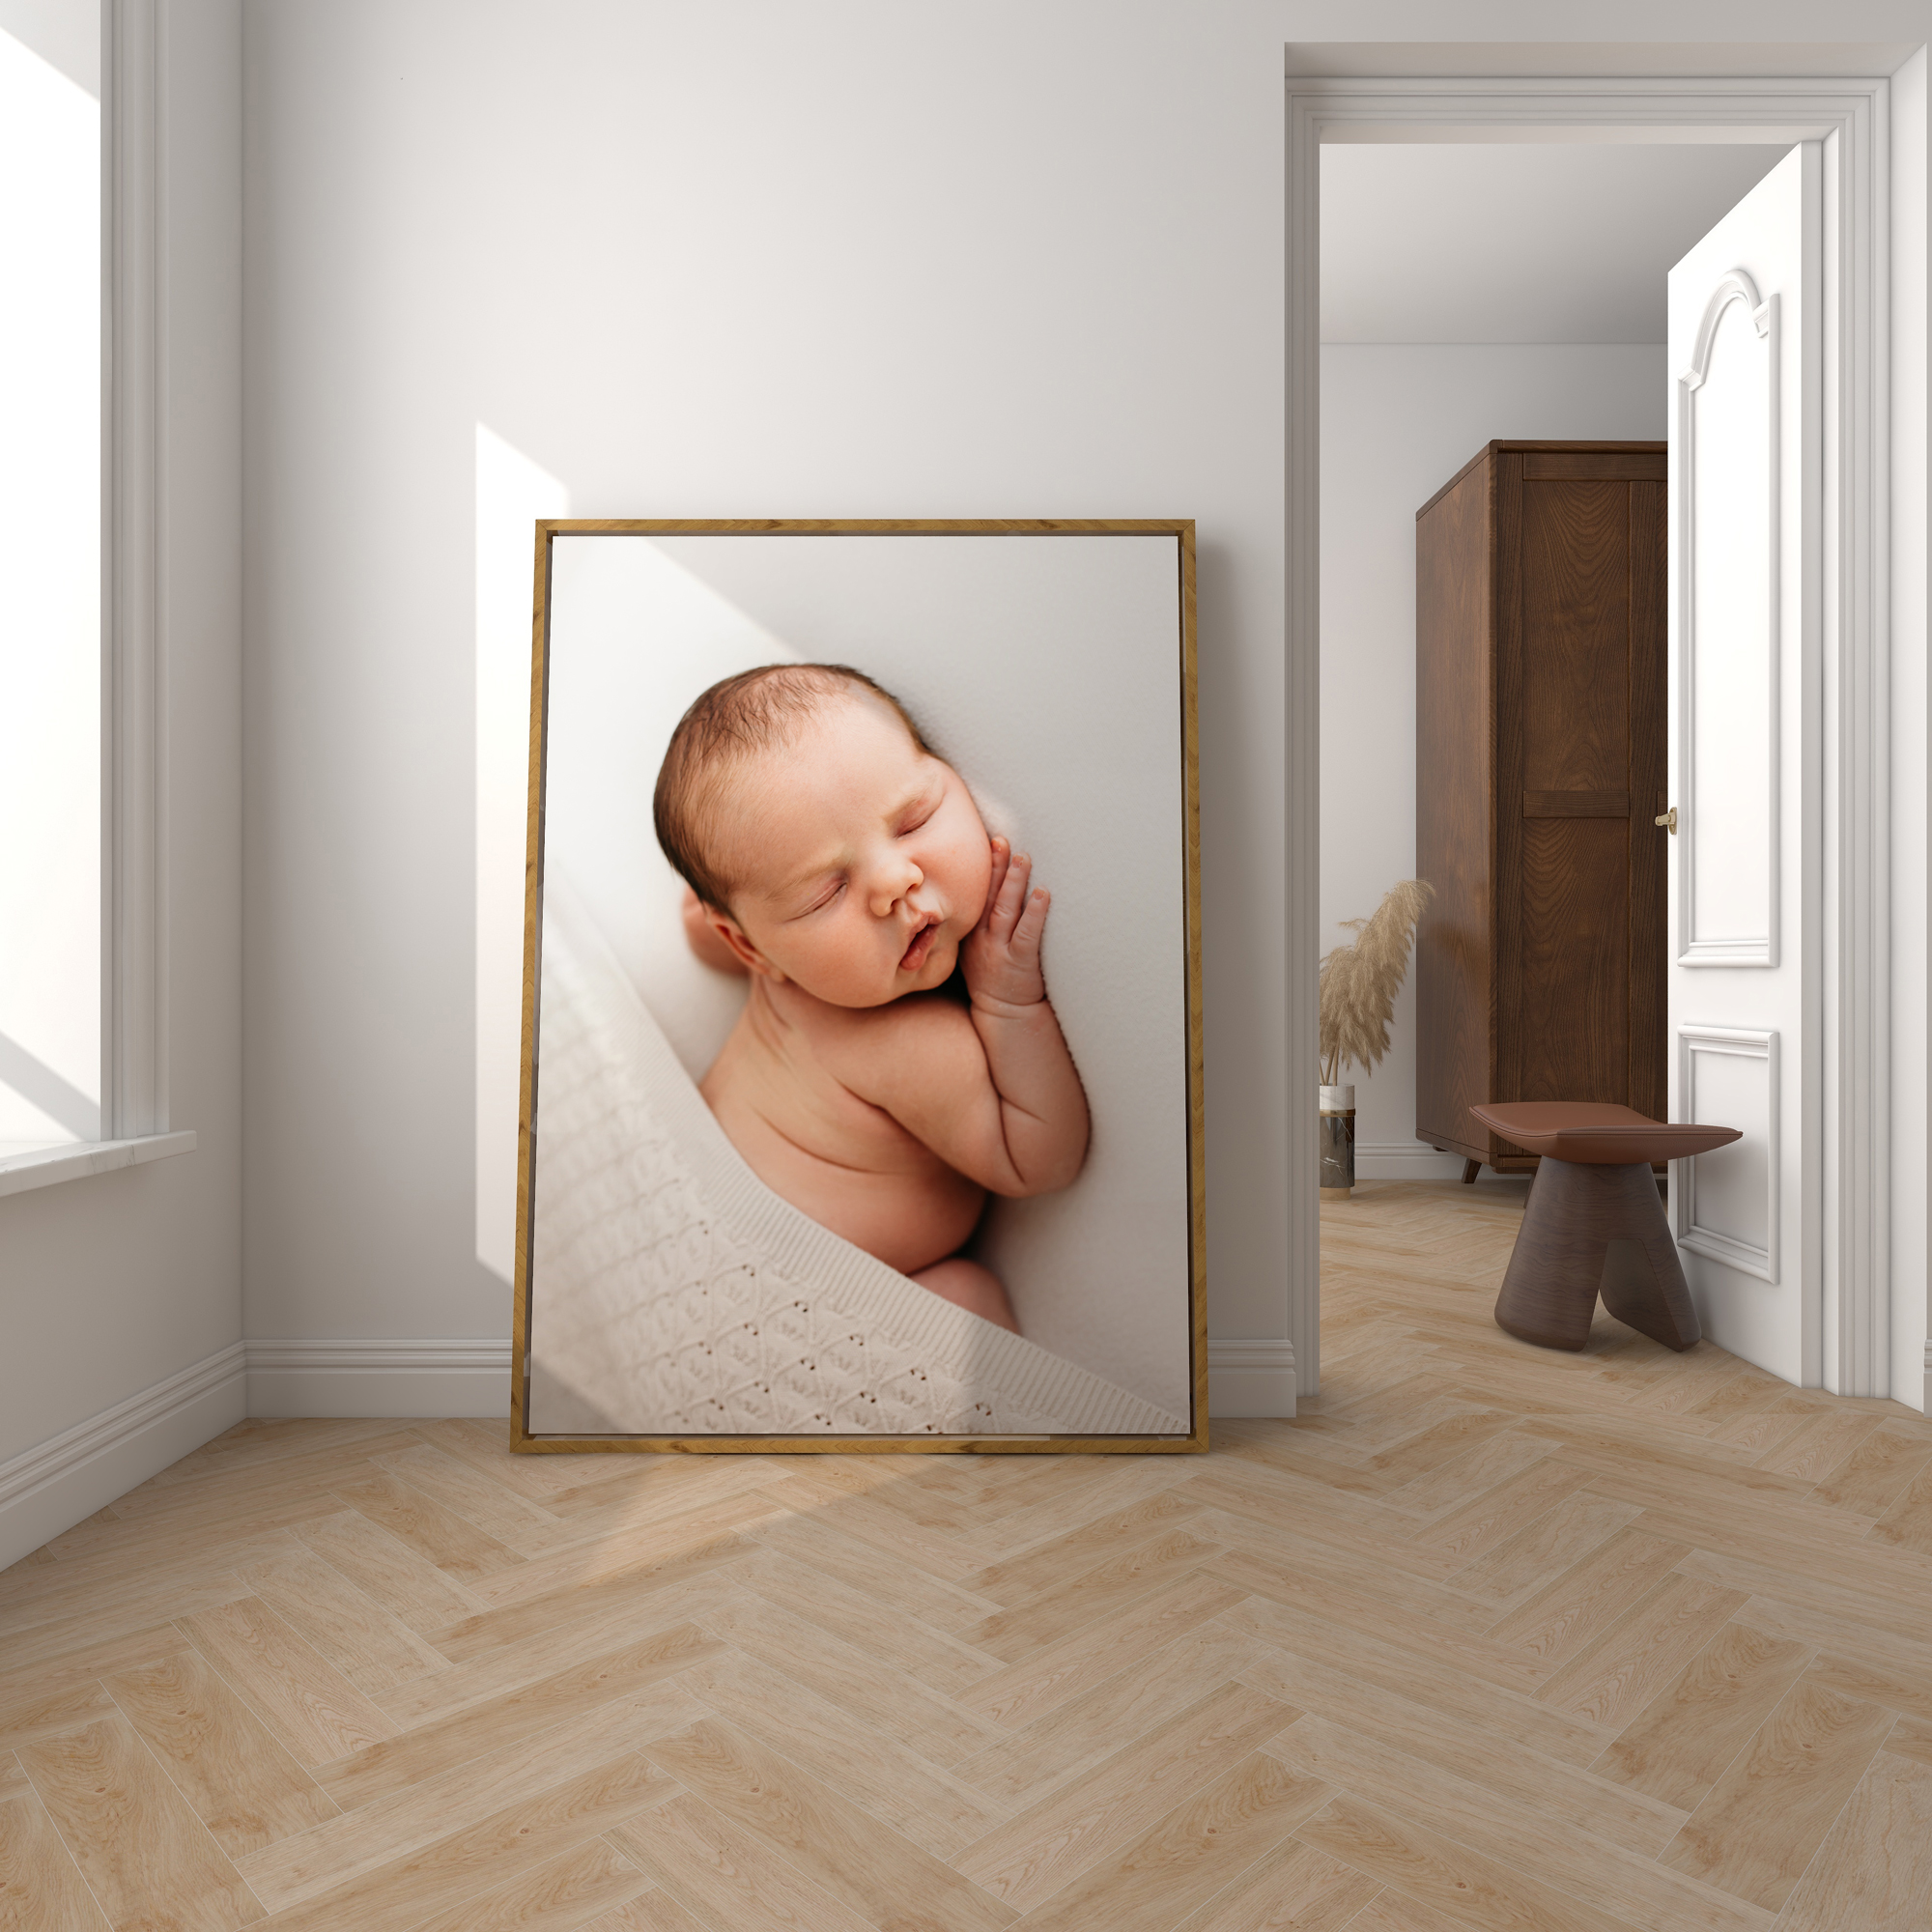 A photo frame with baby boy by Wirral newborn photographer.